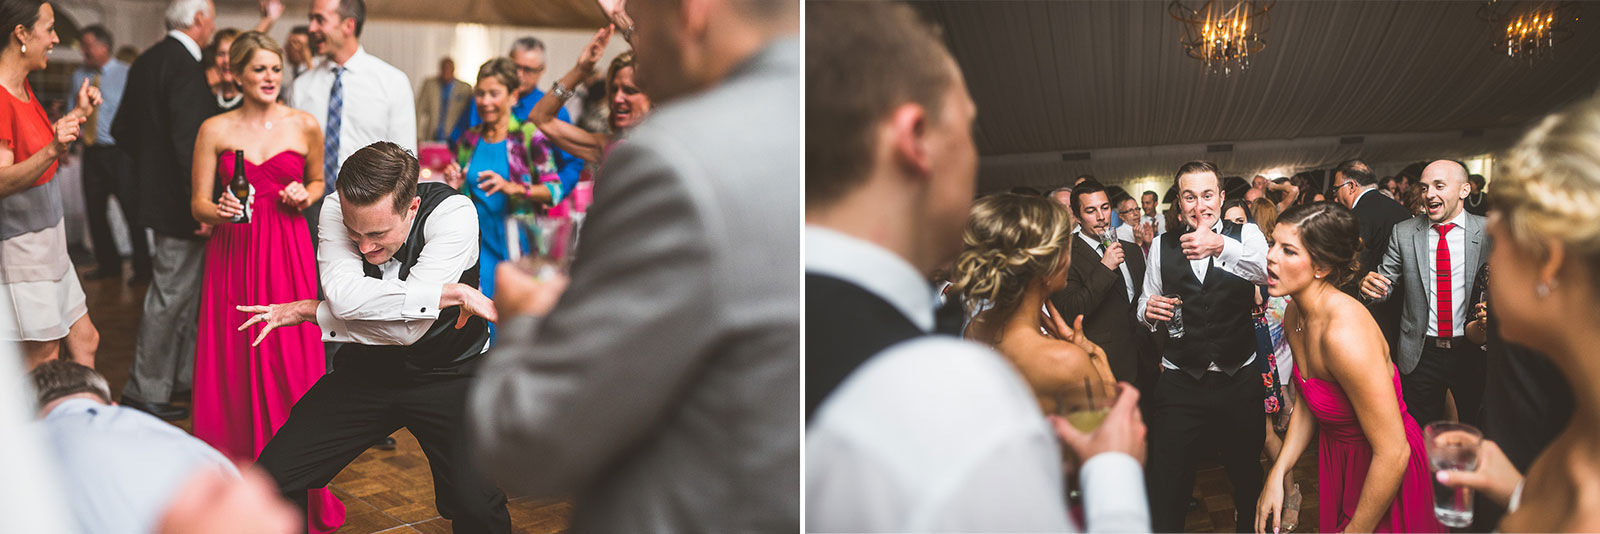 79 groom getting down1 - Kristina + Dave // Wedding Photographer in Chicago